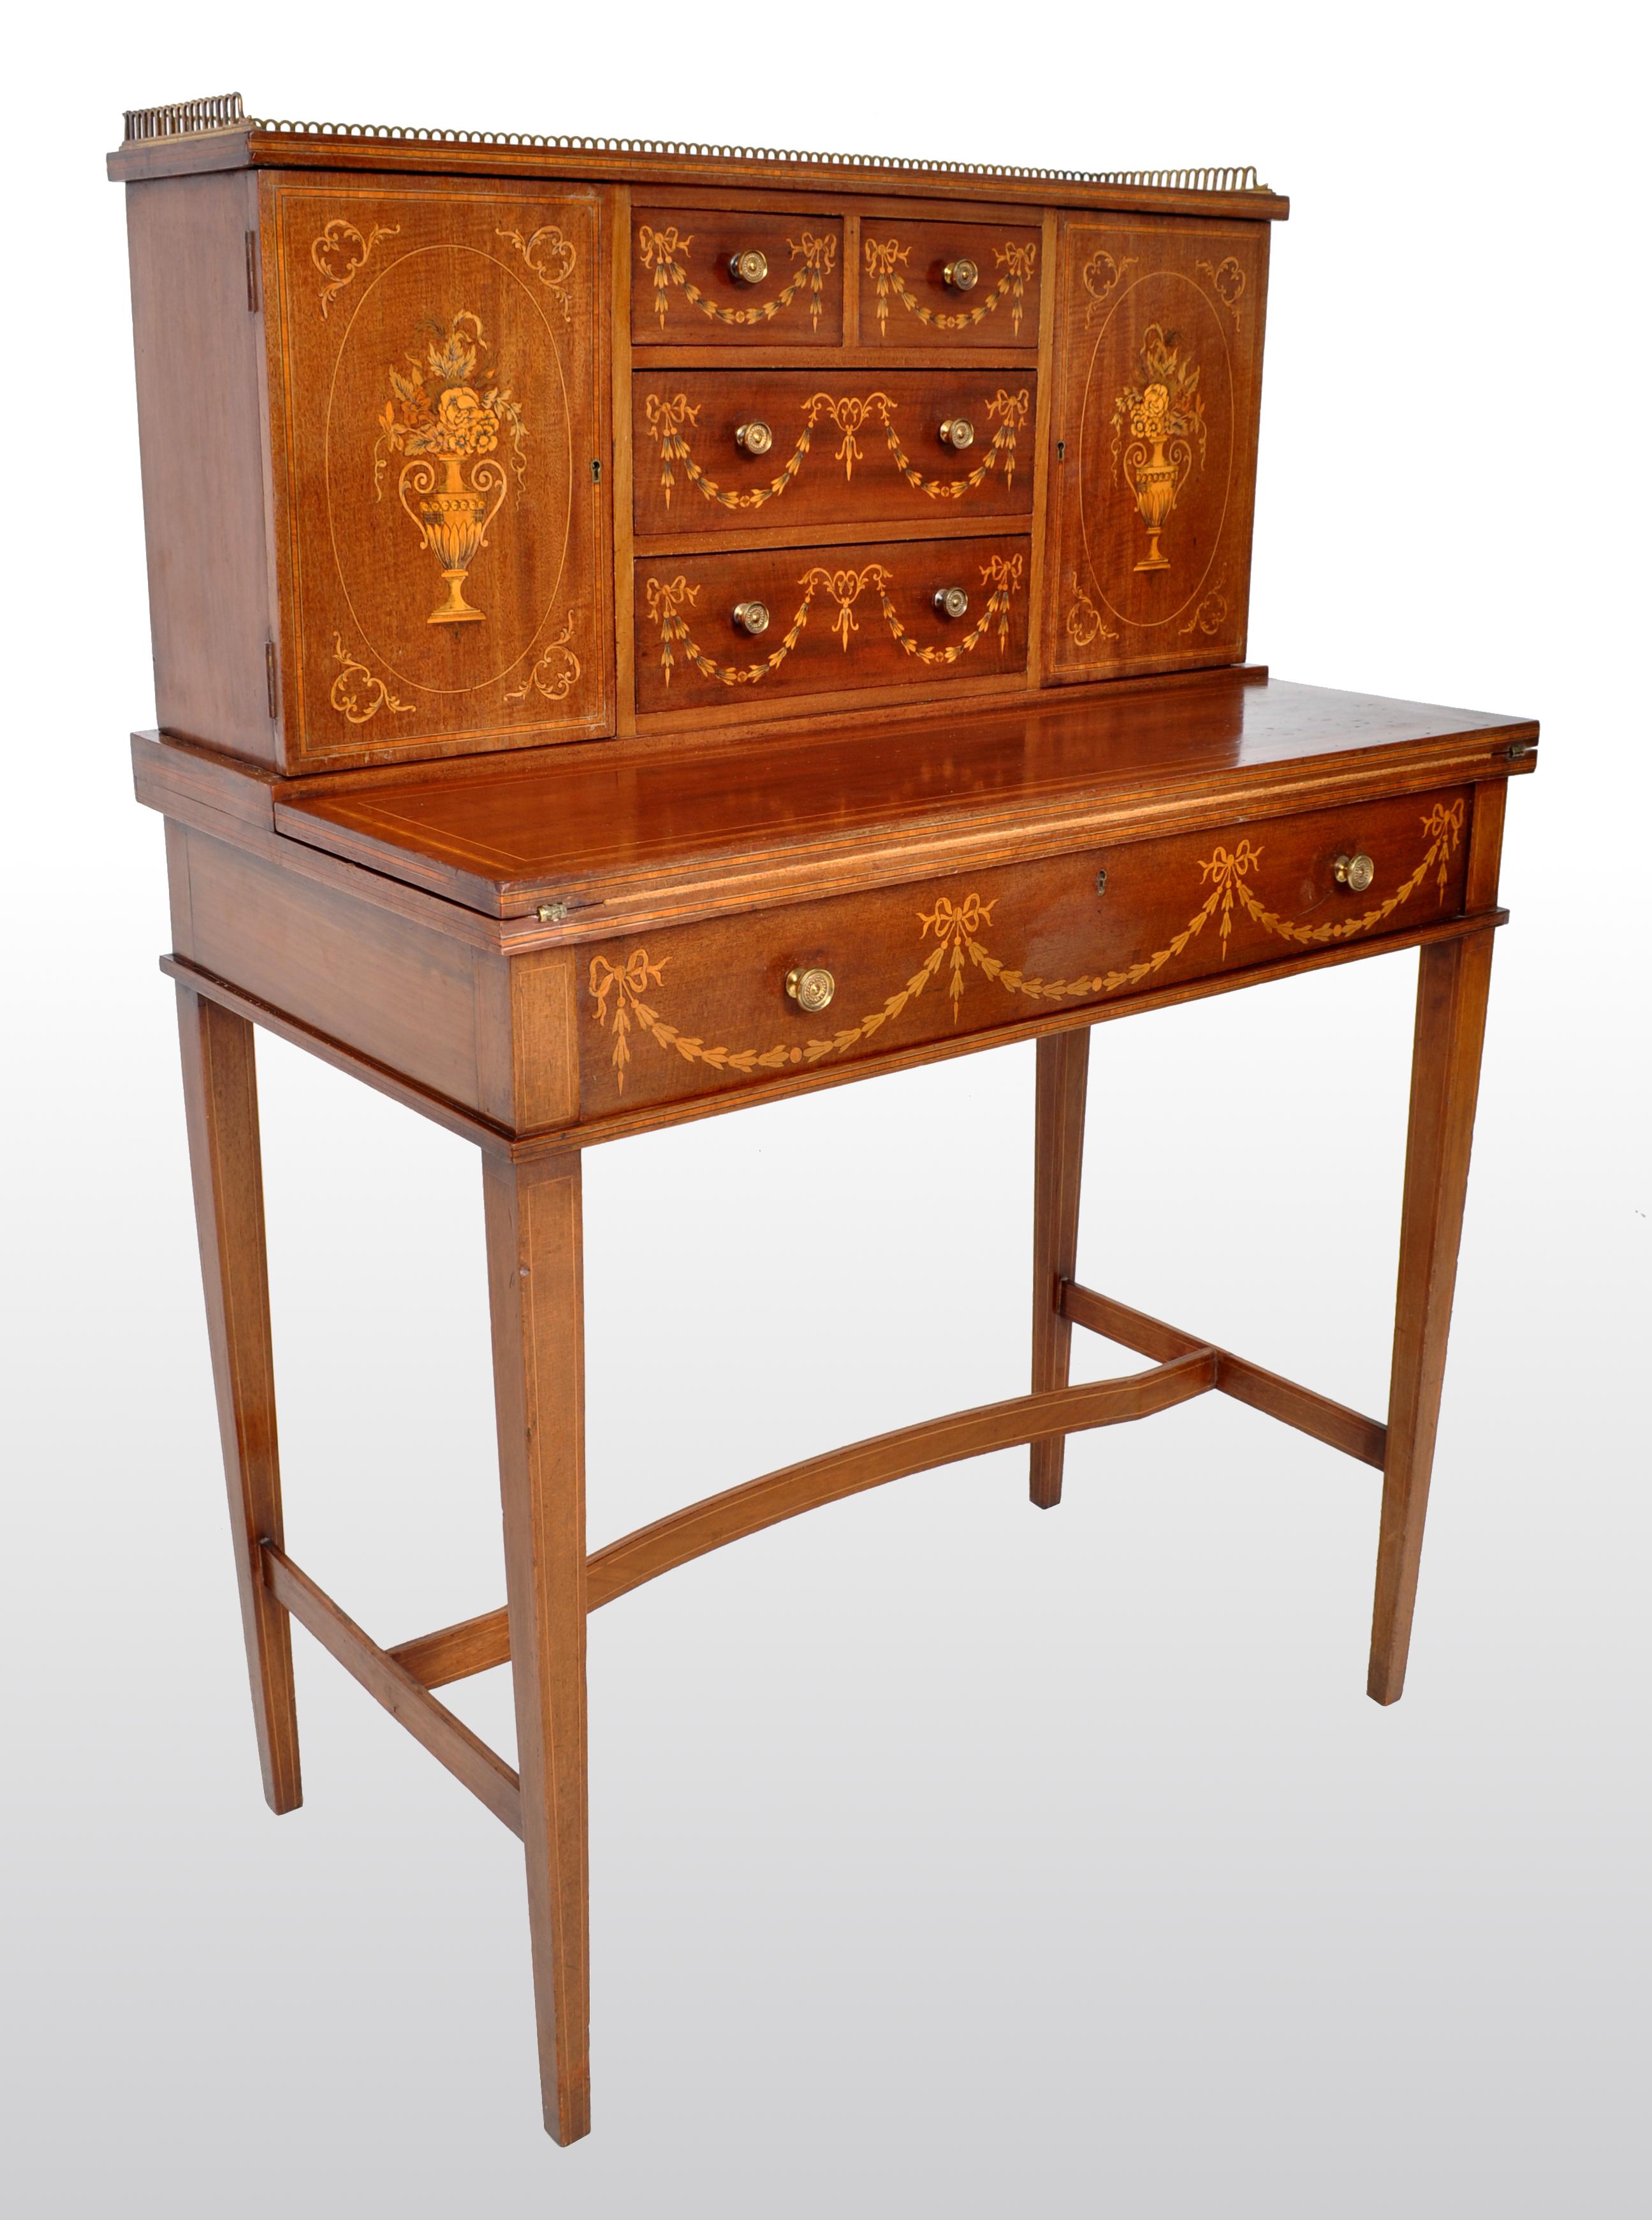 Antique Sheraton Revival inlaid mahogany desk / Bonheur du Jour / writing table, circa 1895. The desk having a pierced brass gallery to the top, below a pair of doors finely inlaid with neoclassical flowering urns. The doors enclosing lateral and